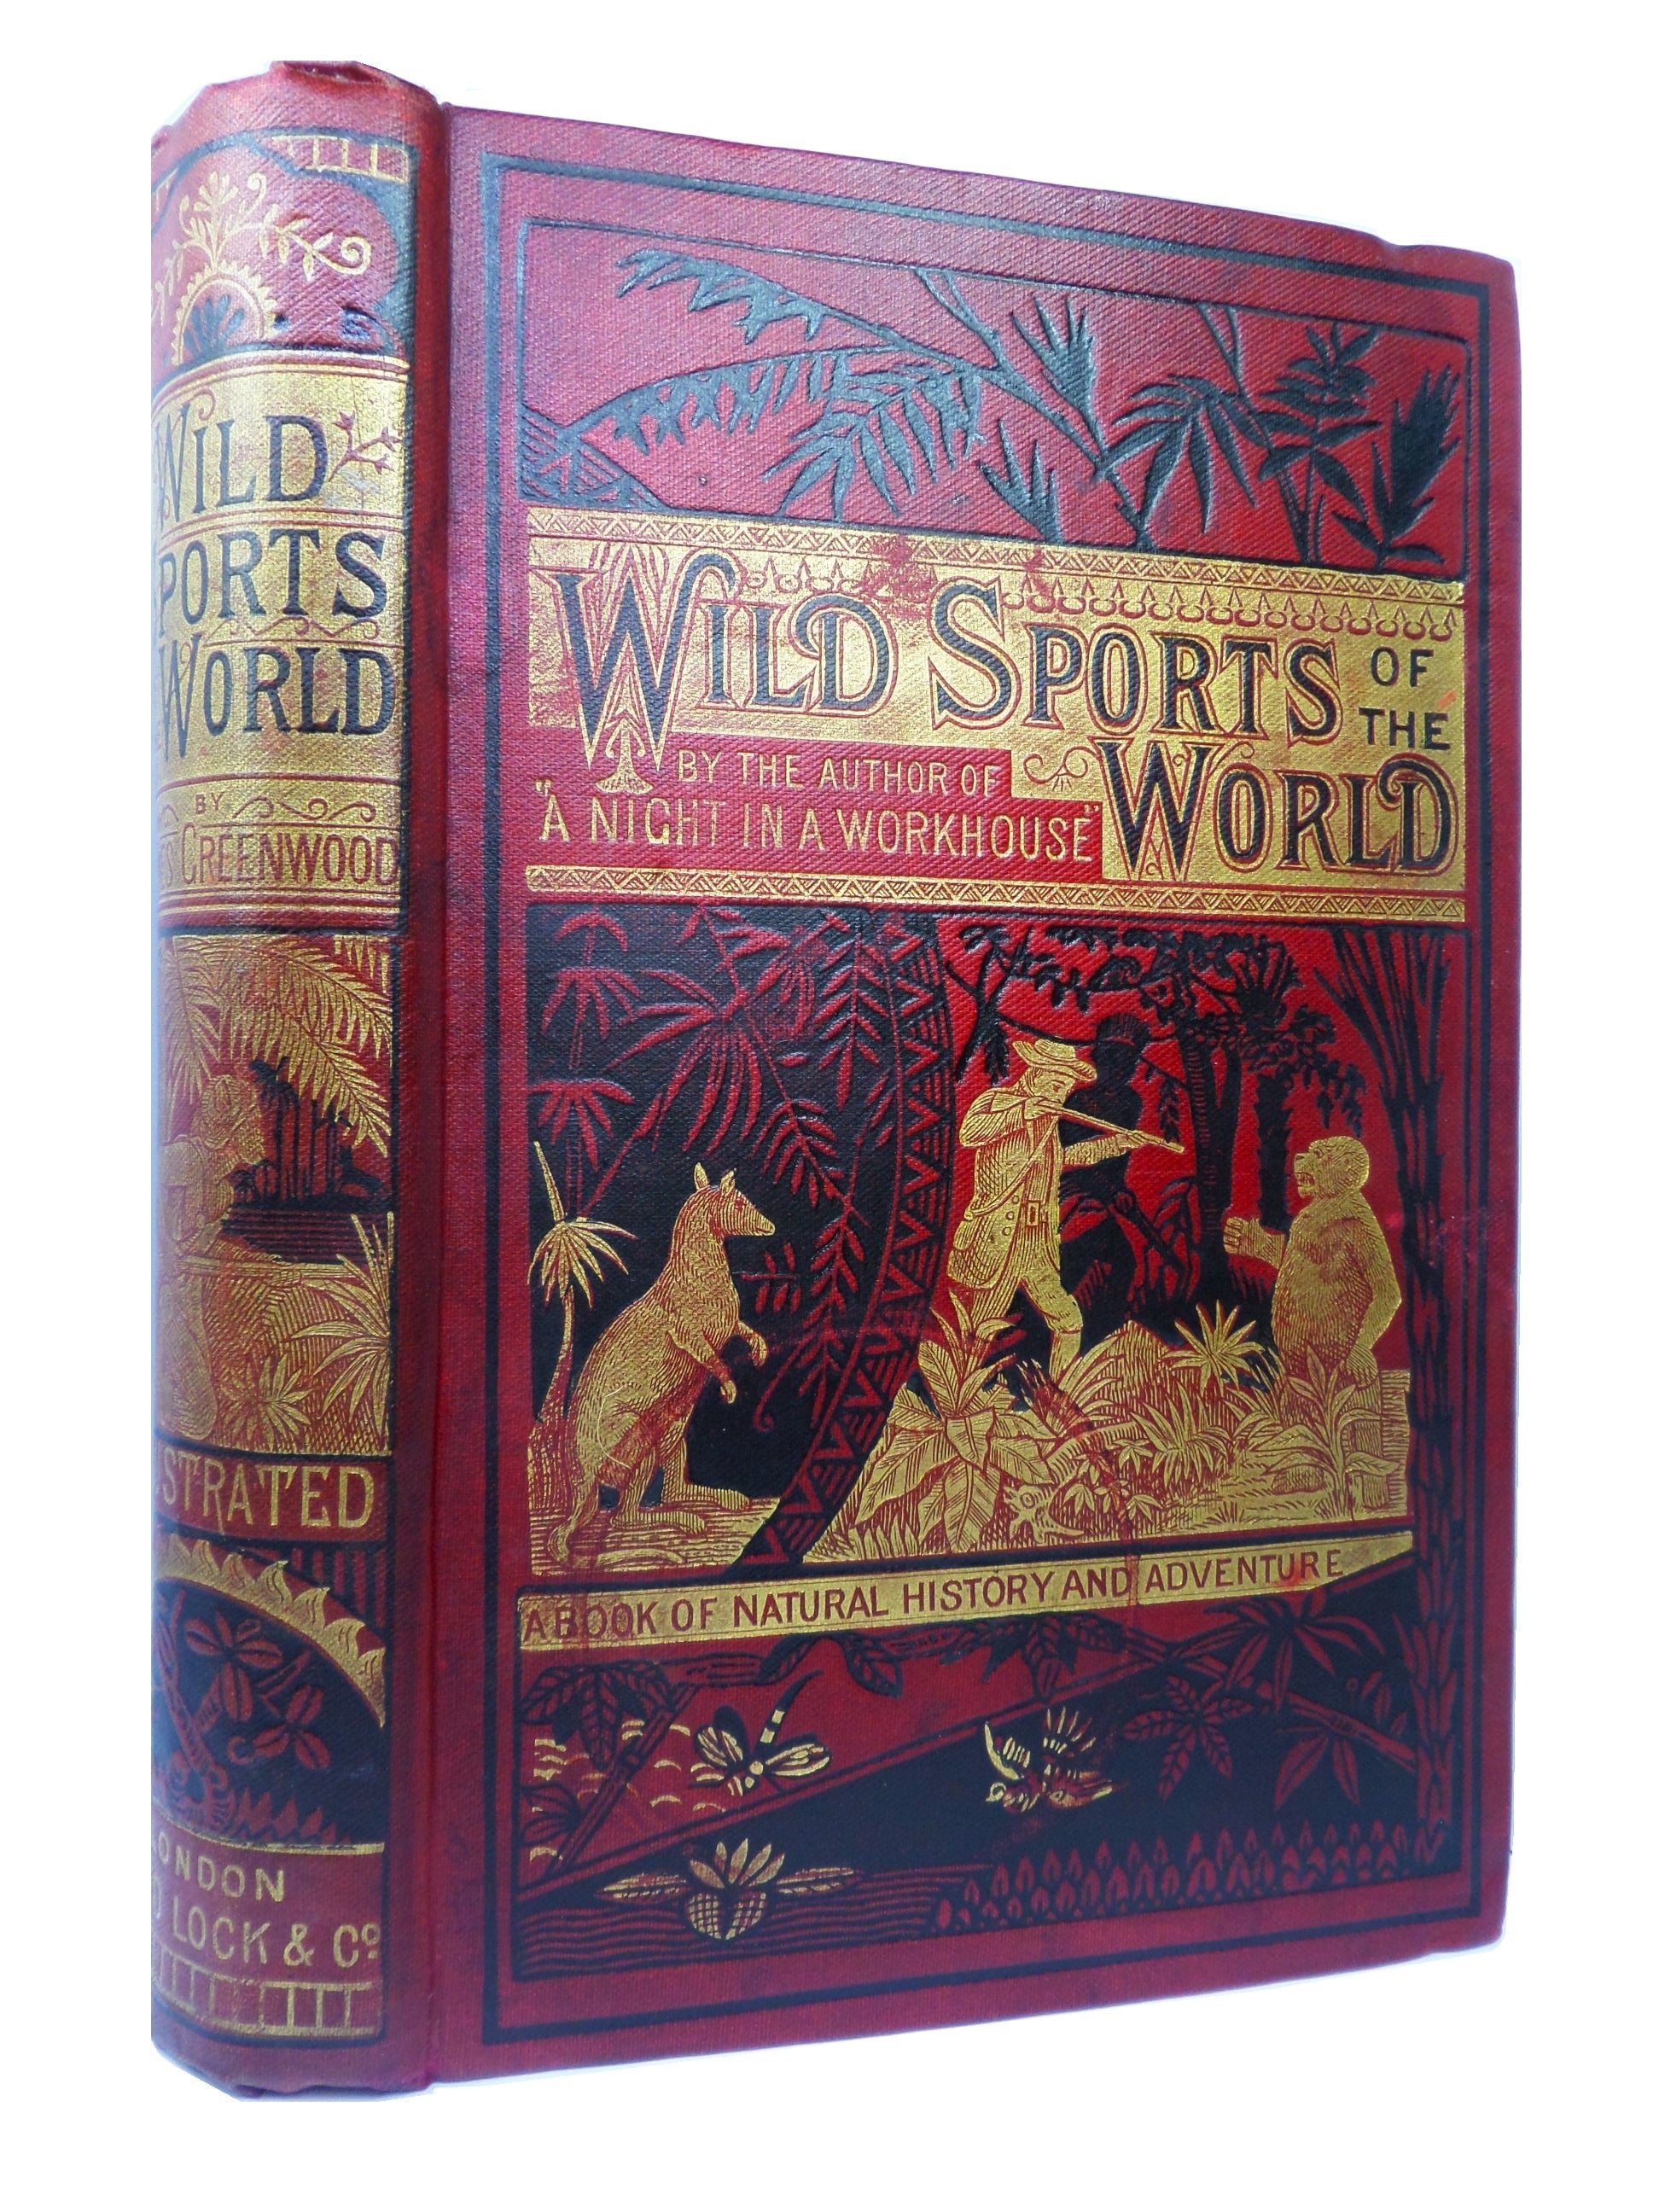 WILD SPORTS OF THE WORLD BY JAMES GREENWOOD CA.1880